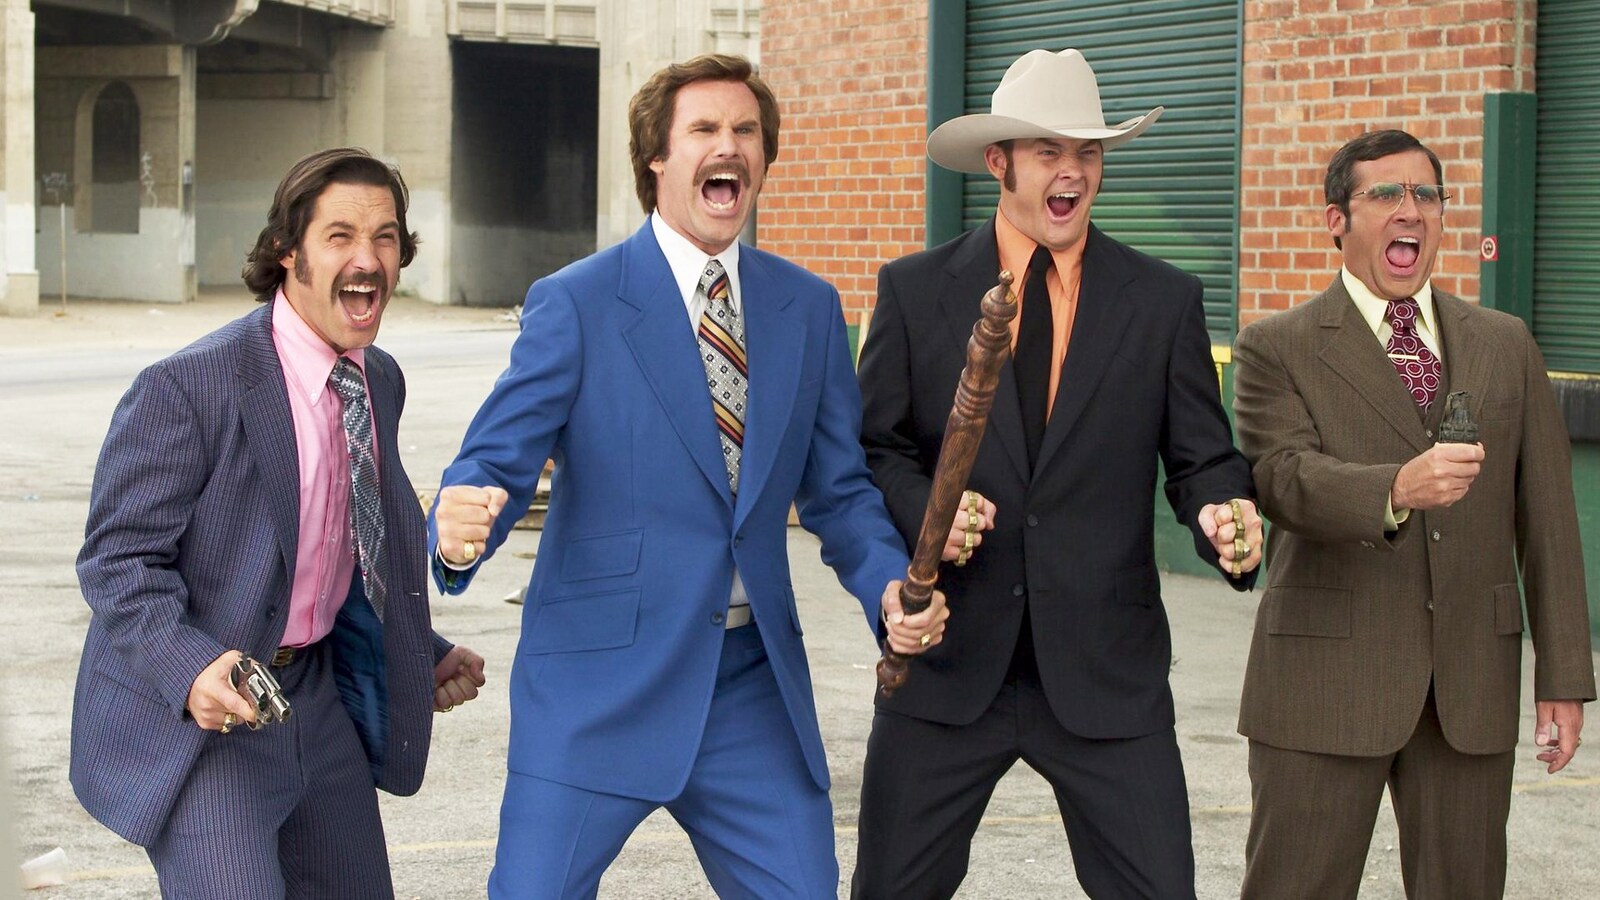 anchorman-the-legend-of-ron-burgundy-2004